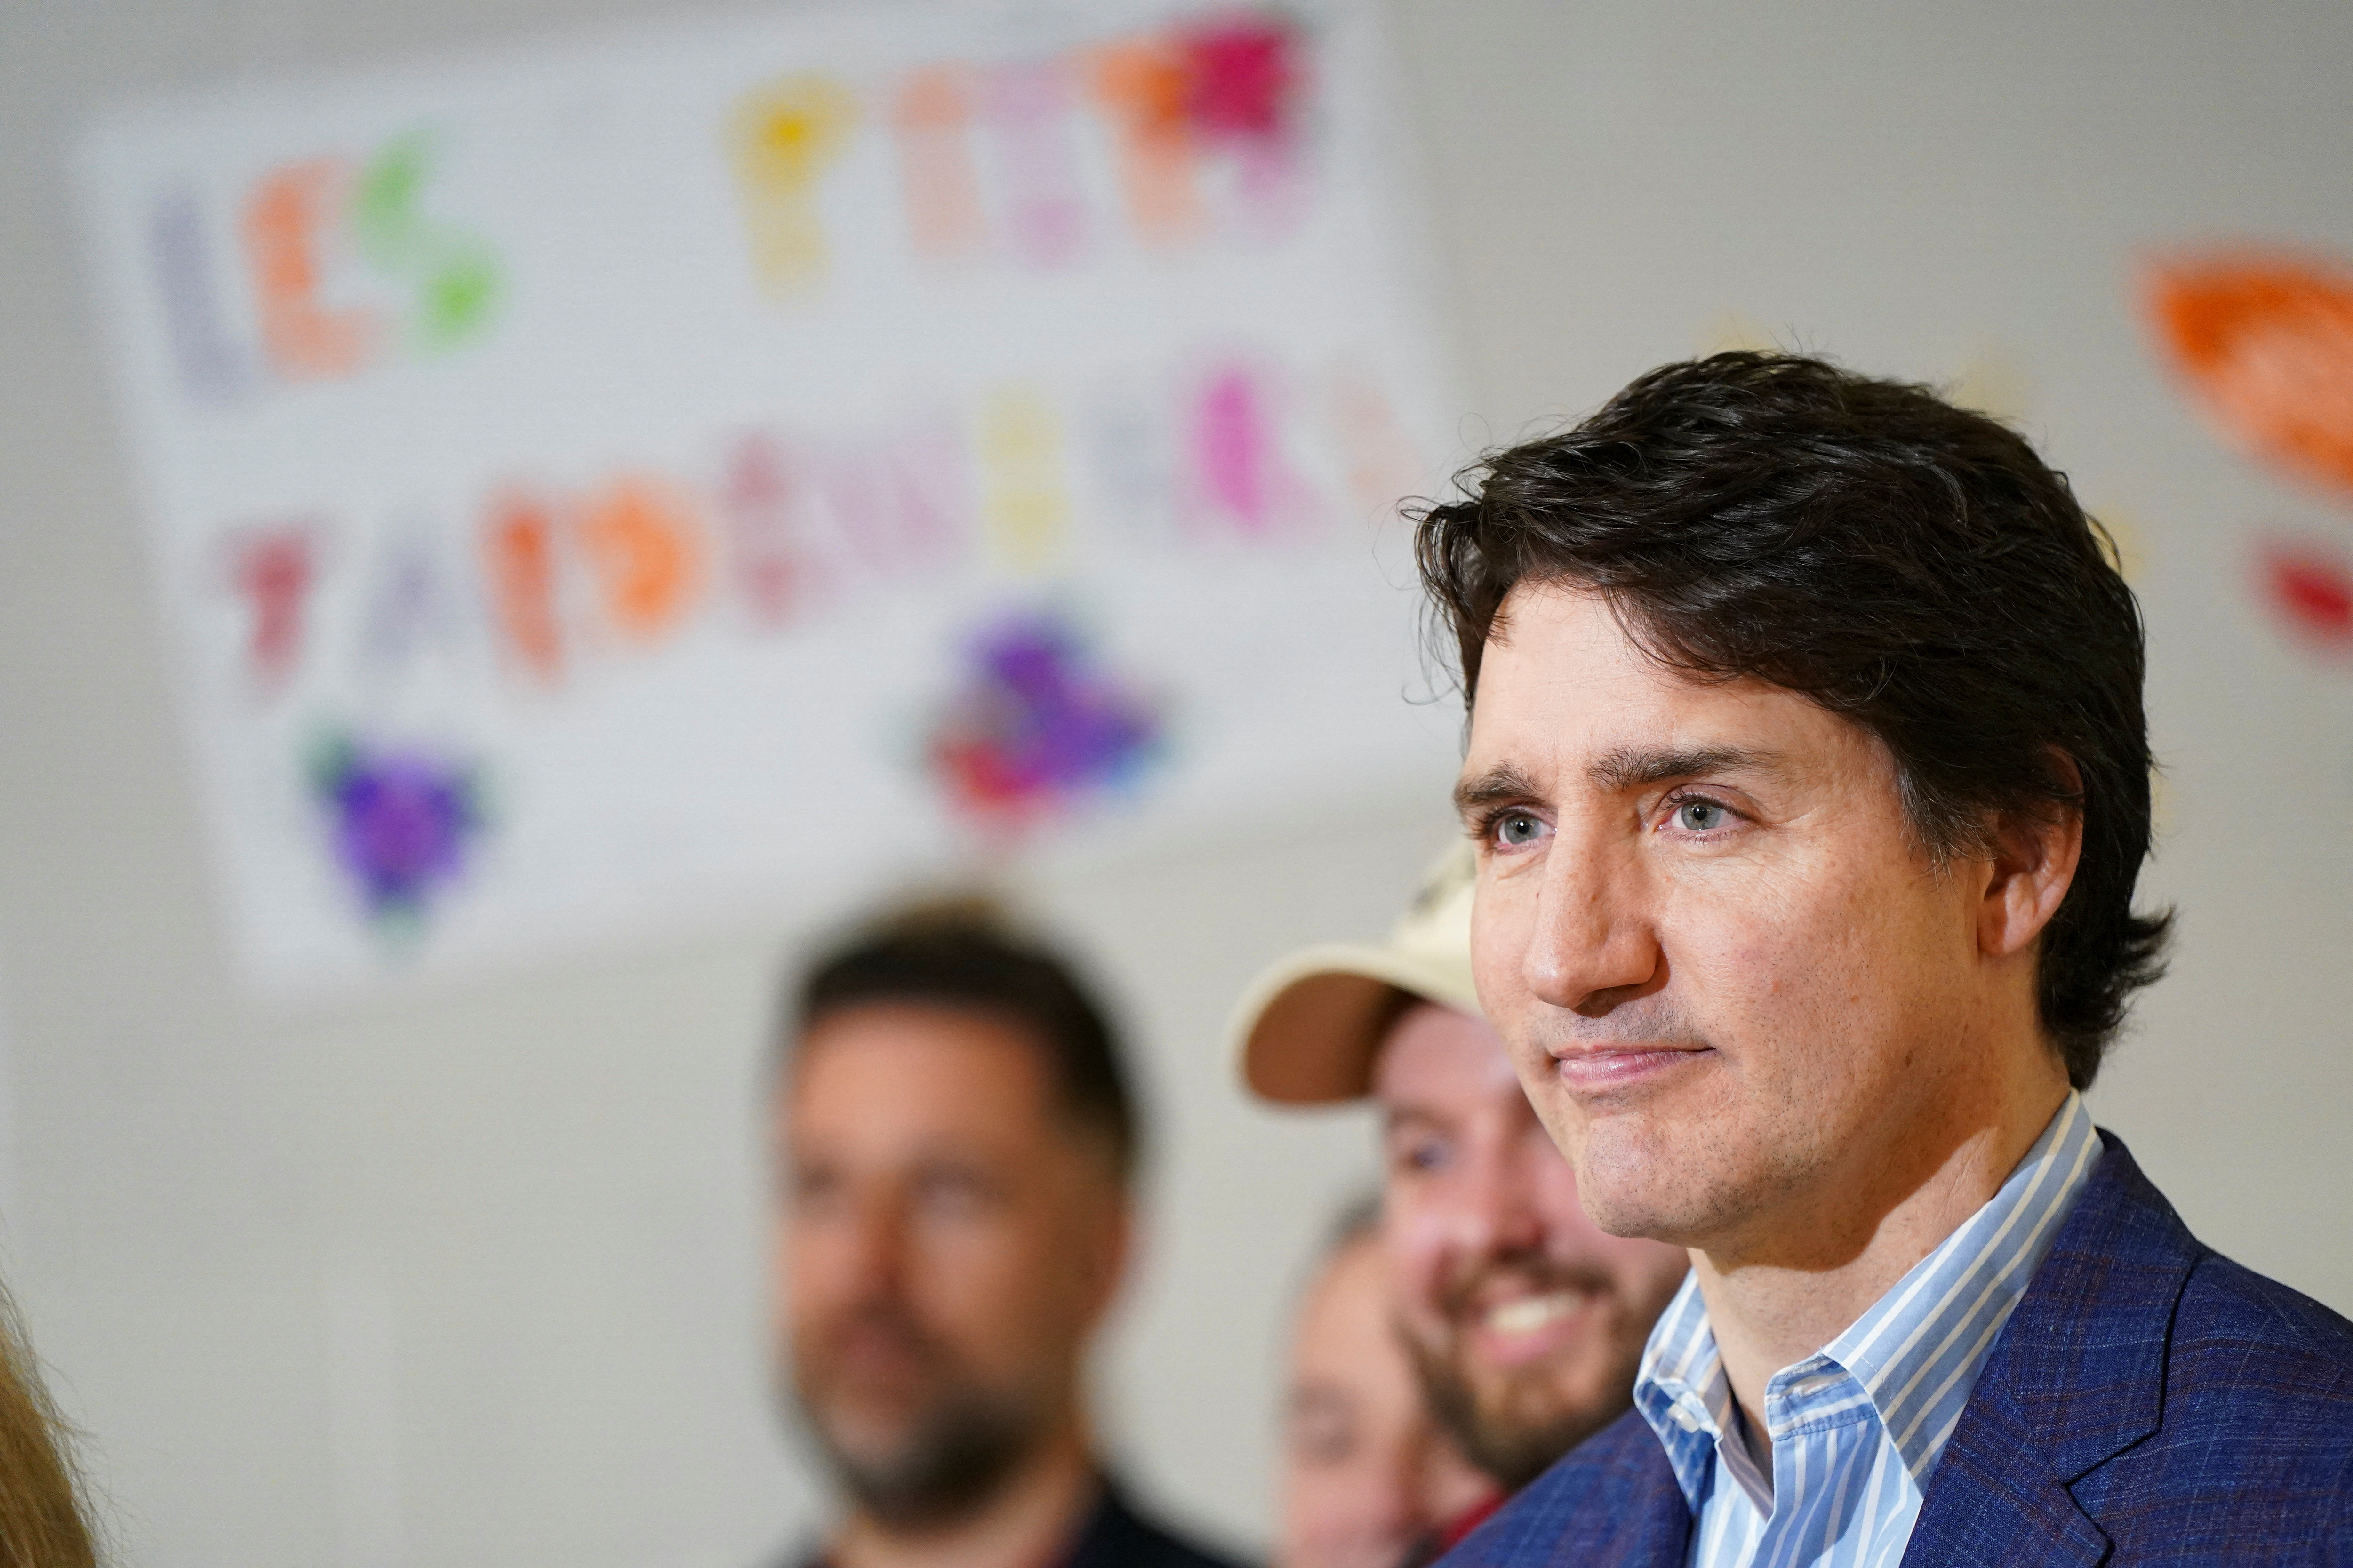 Canada's PM Trudeau attends an event in Caraquet, northern New Brunswick